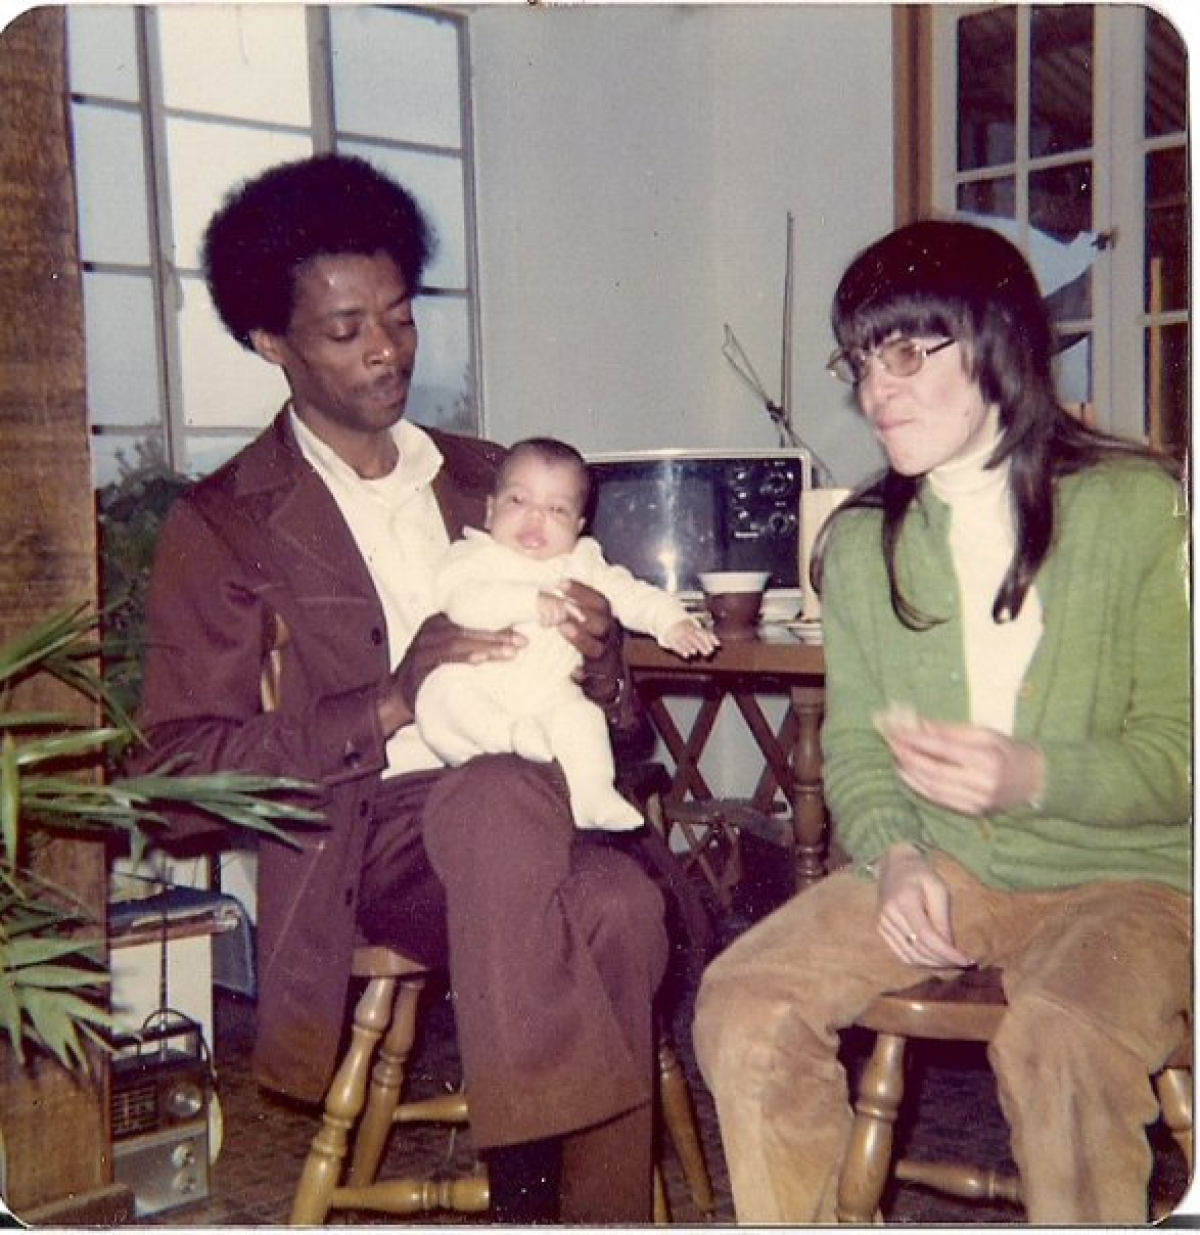 Shannon Luders-Manuel and her parents at their Haight Street apartment, 1977. (Shannon Luders-Manuel)